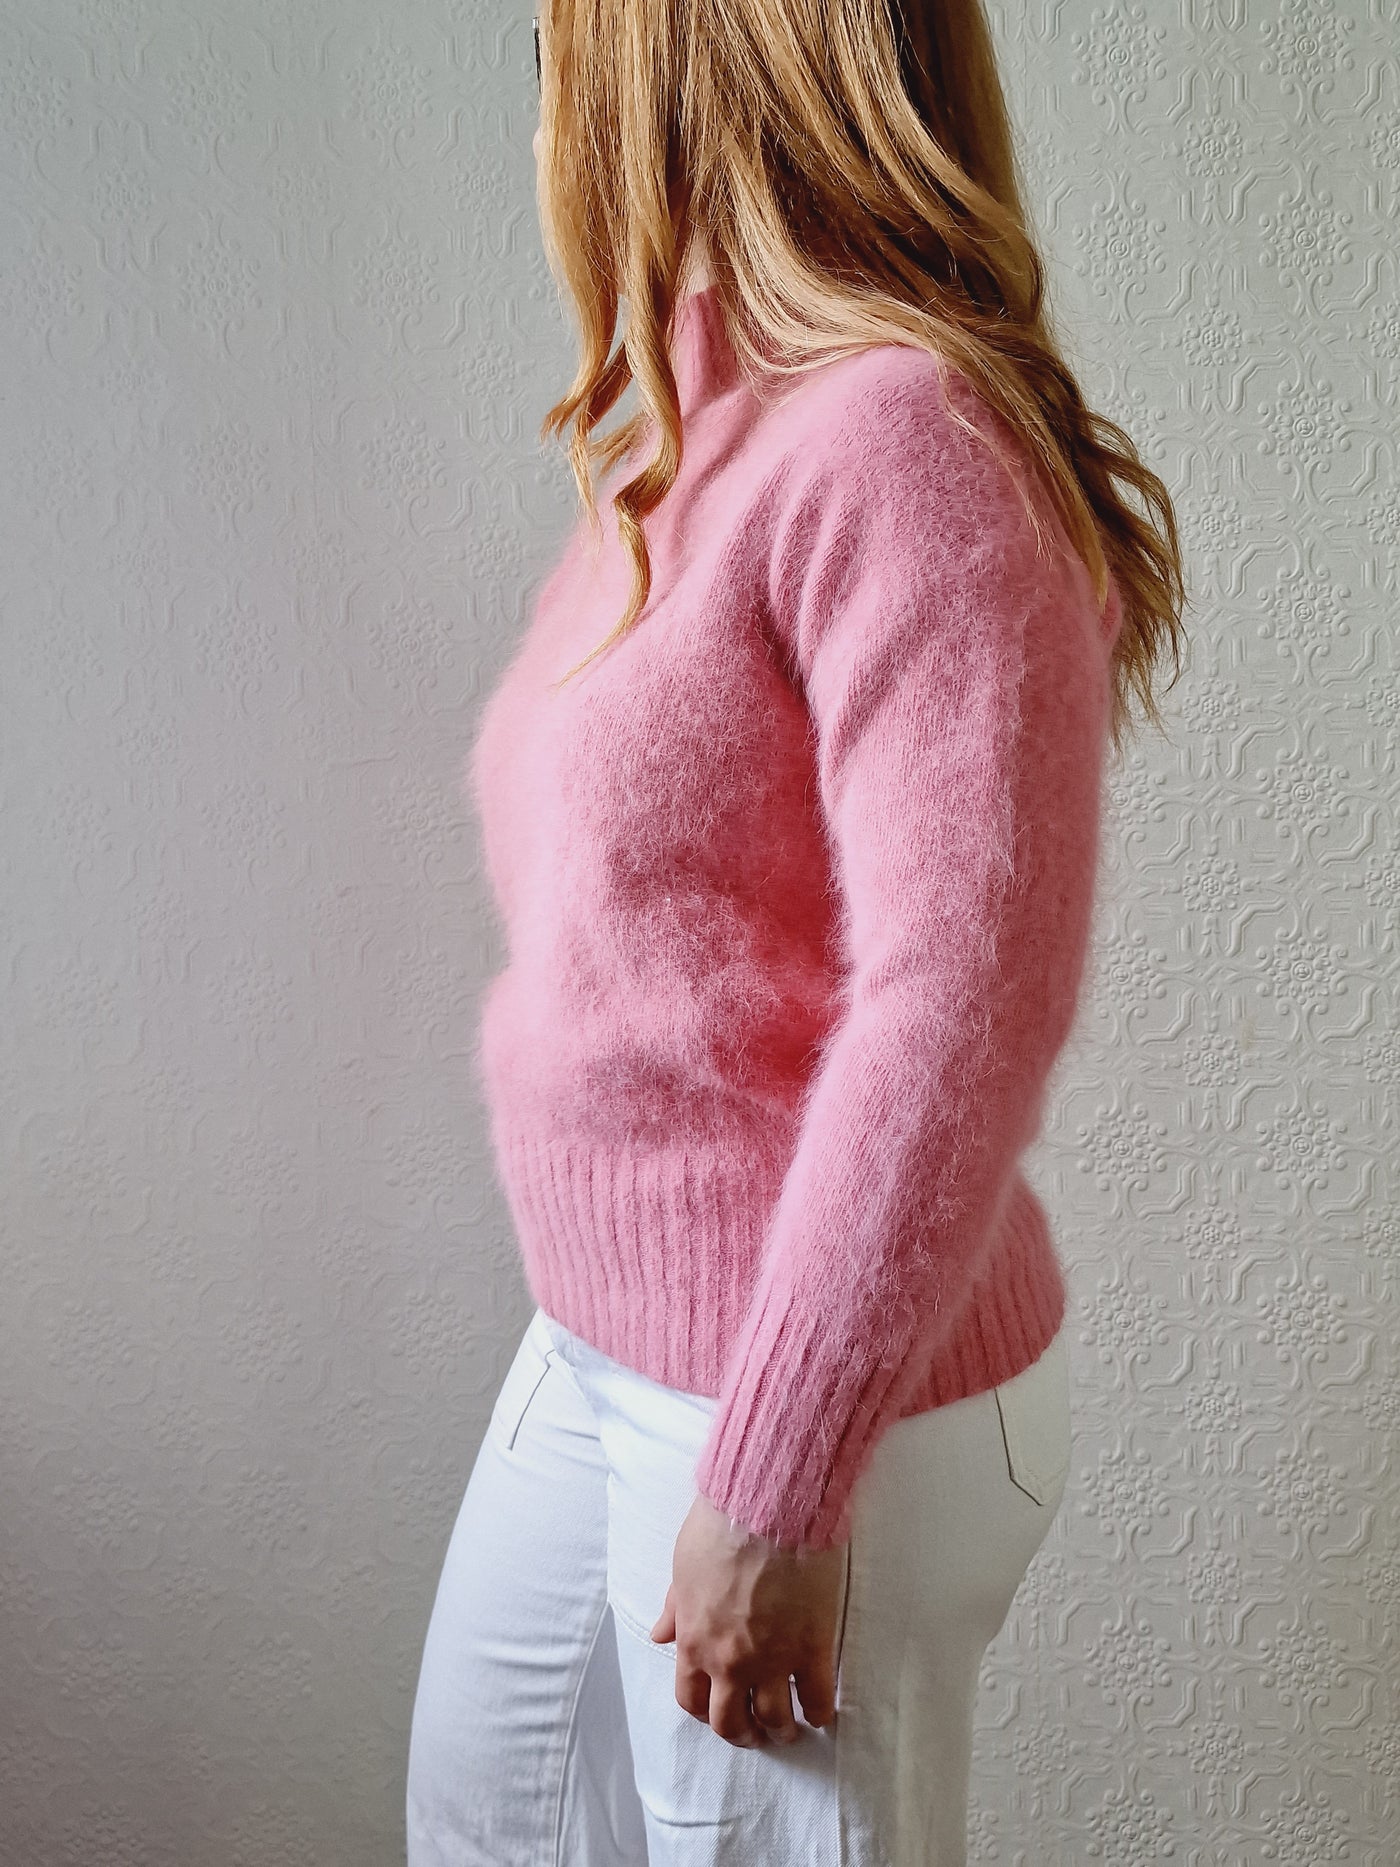 Vintage Pink Angora Jumper with High Neck - S